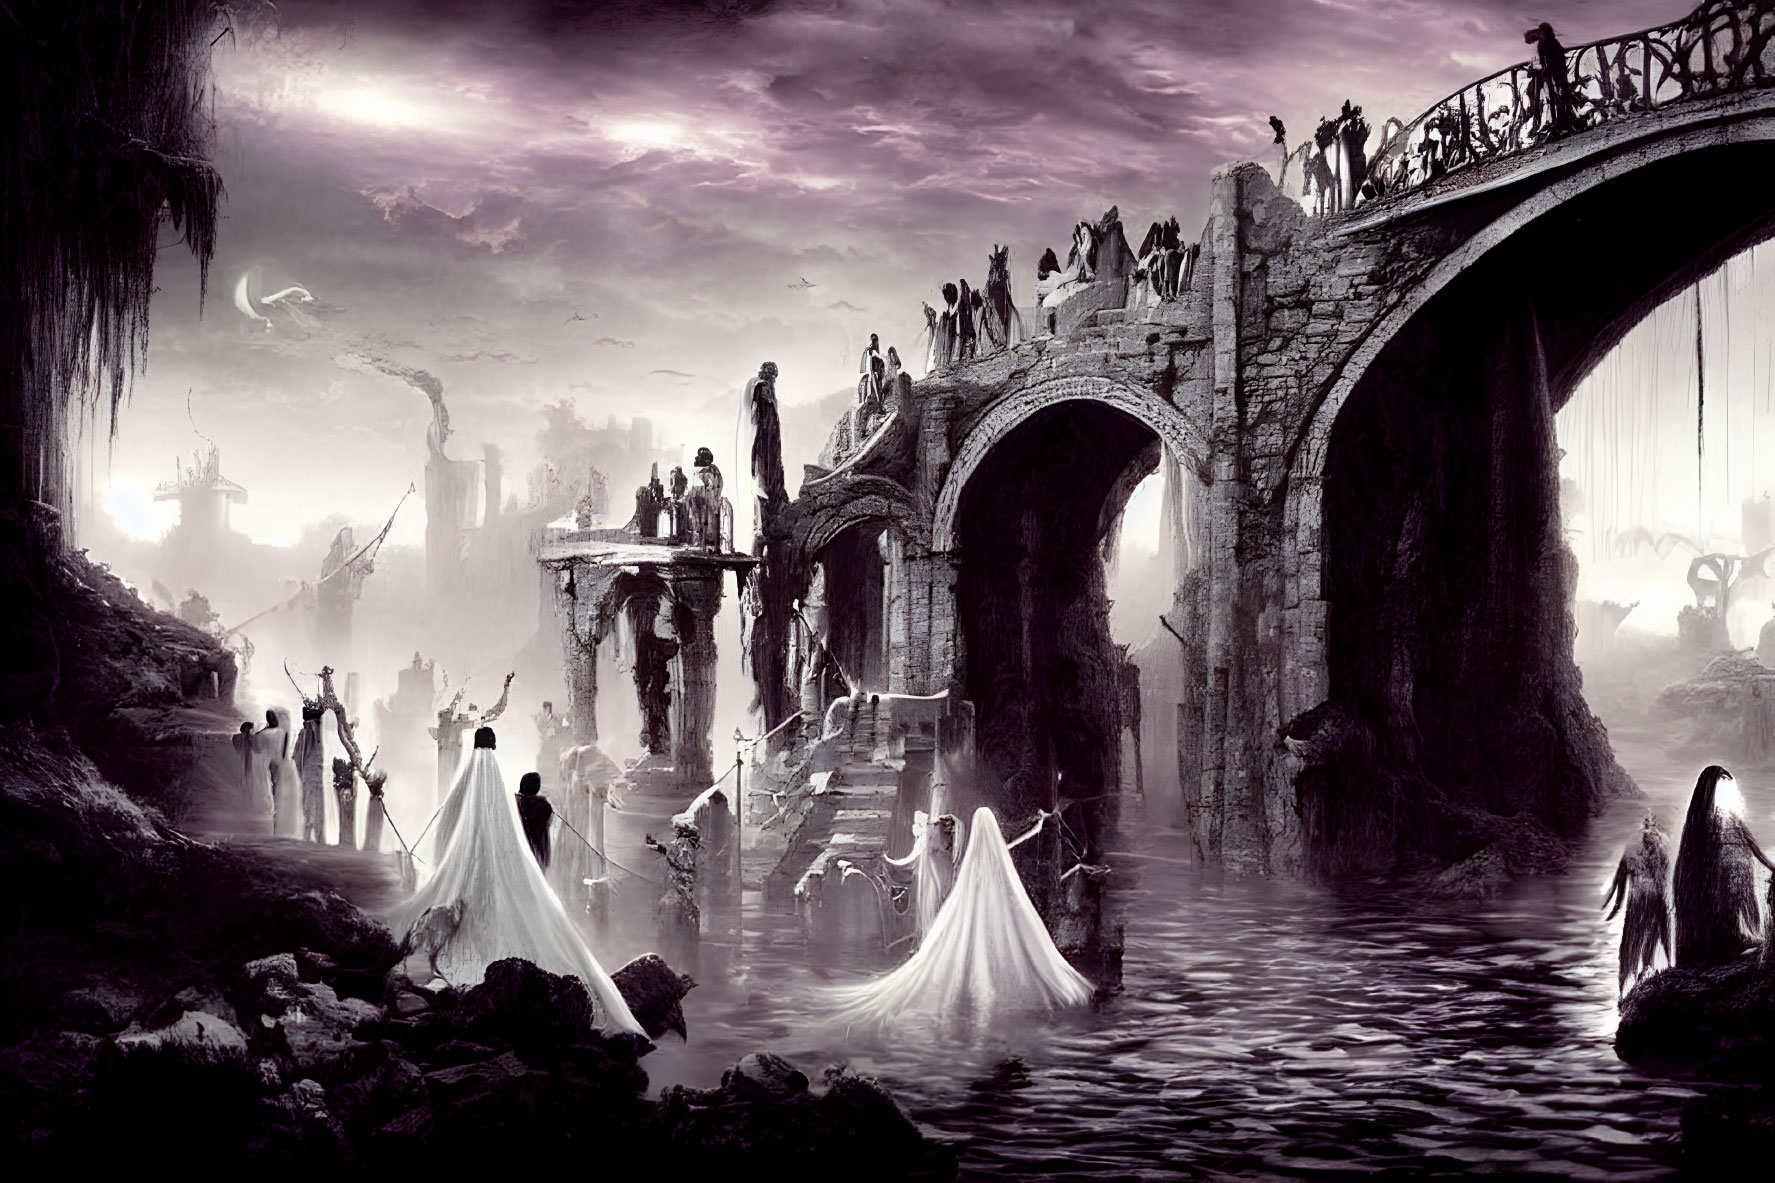 Monochrome fantasy landscape with ghostly figures, stone bridges, and misty atmosphere